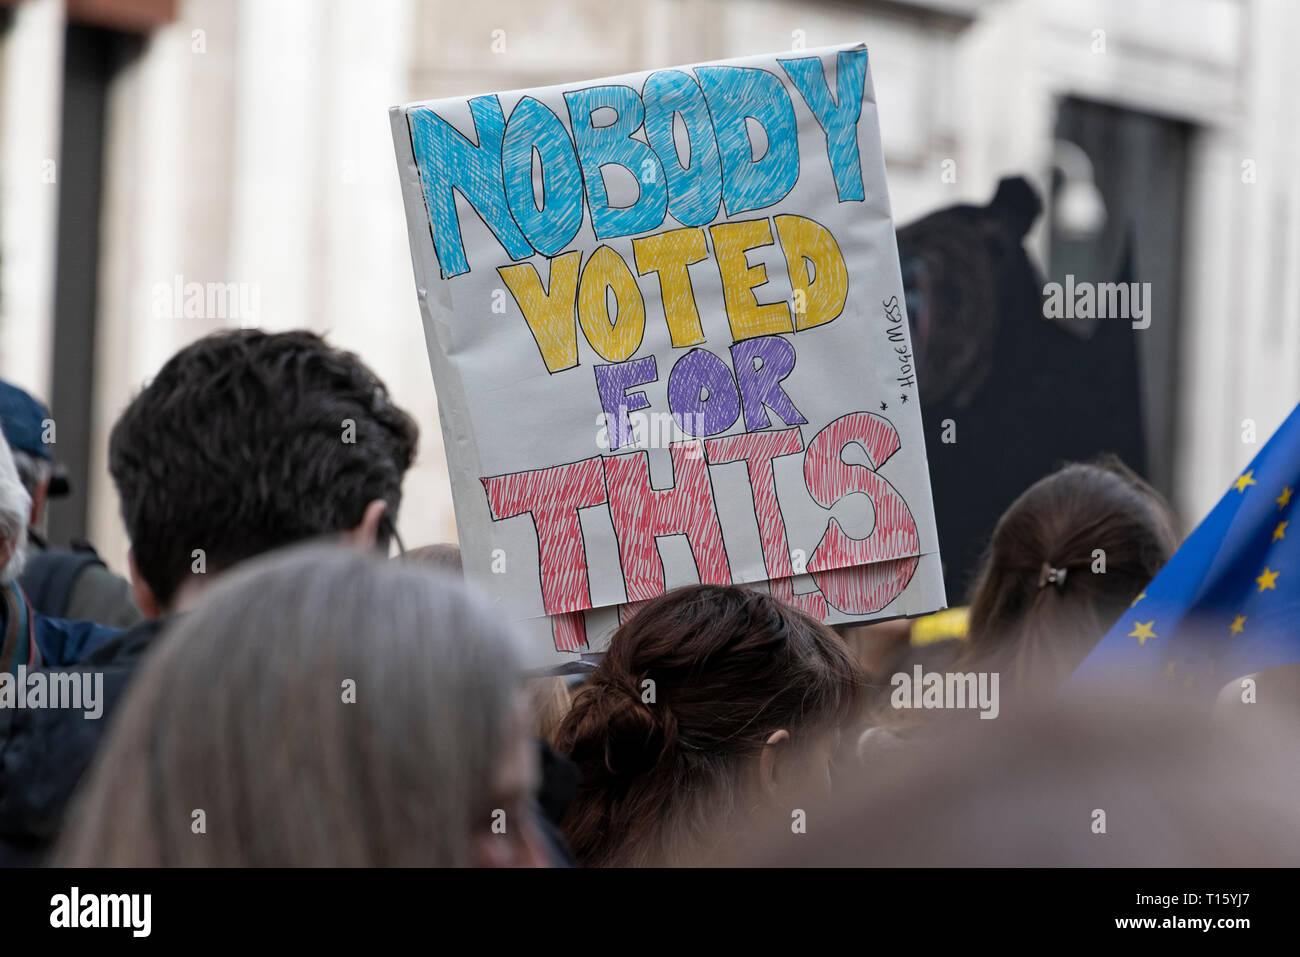 London, UK. 23rd Mar, 2019. Peoples Vote March, Nobody Voted for THIS placard. Crowd detail and banners as taken from the perspective of a protester. Remain banners, second referendum. Credit: Tony Pincham/Alamy Live News Stock Photo